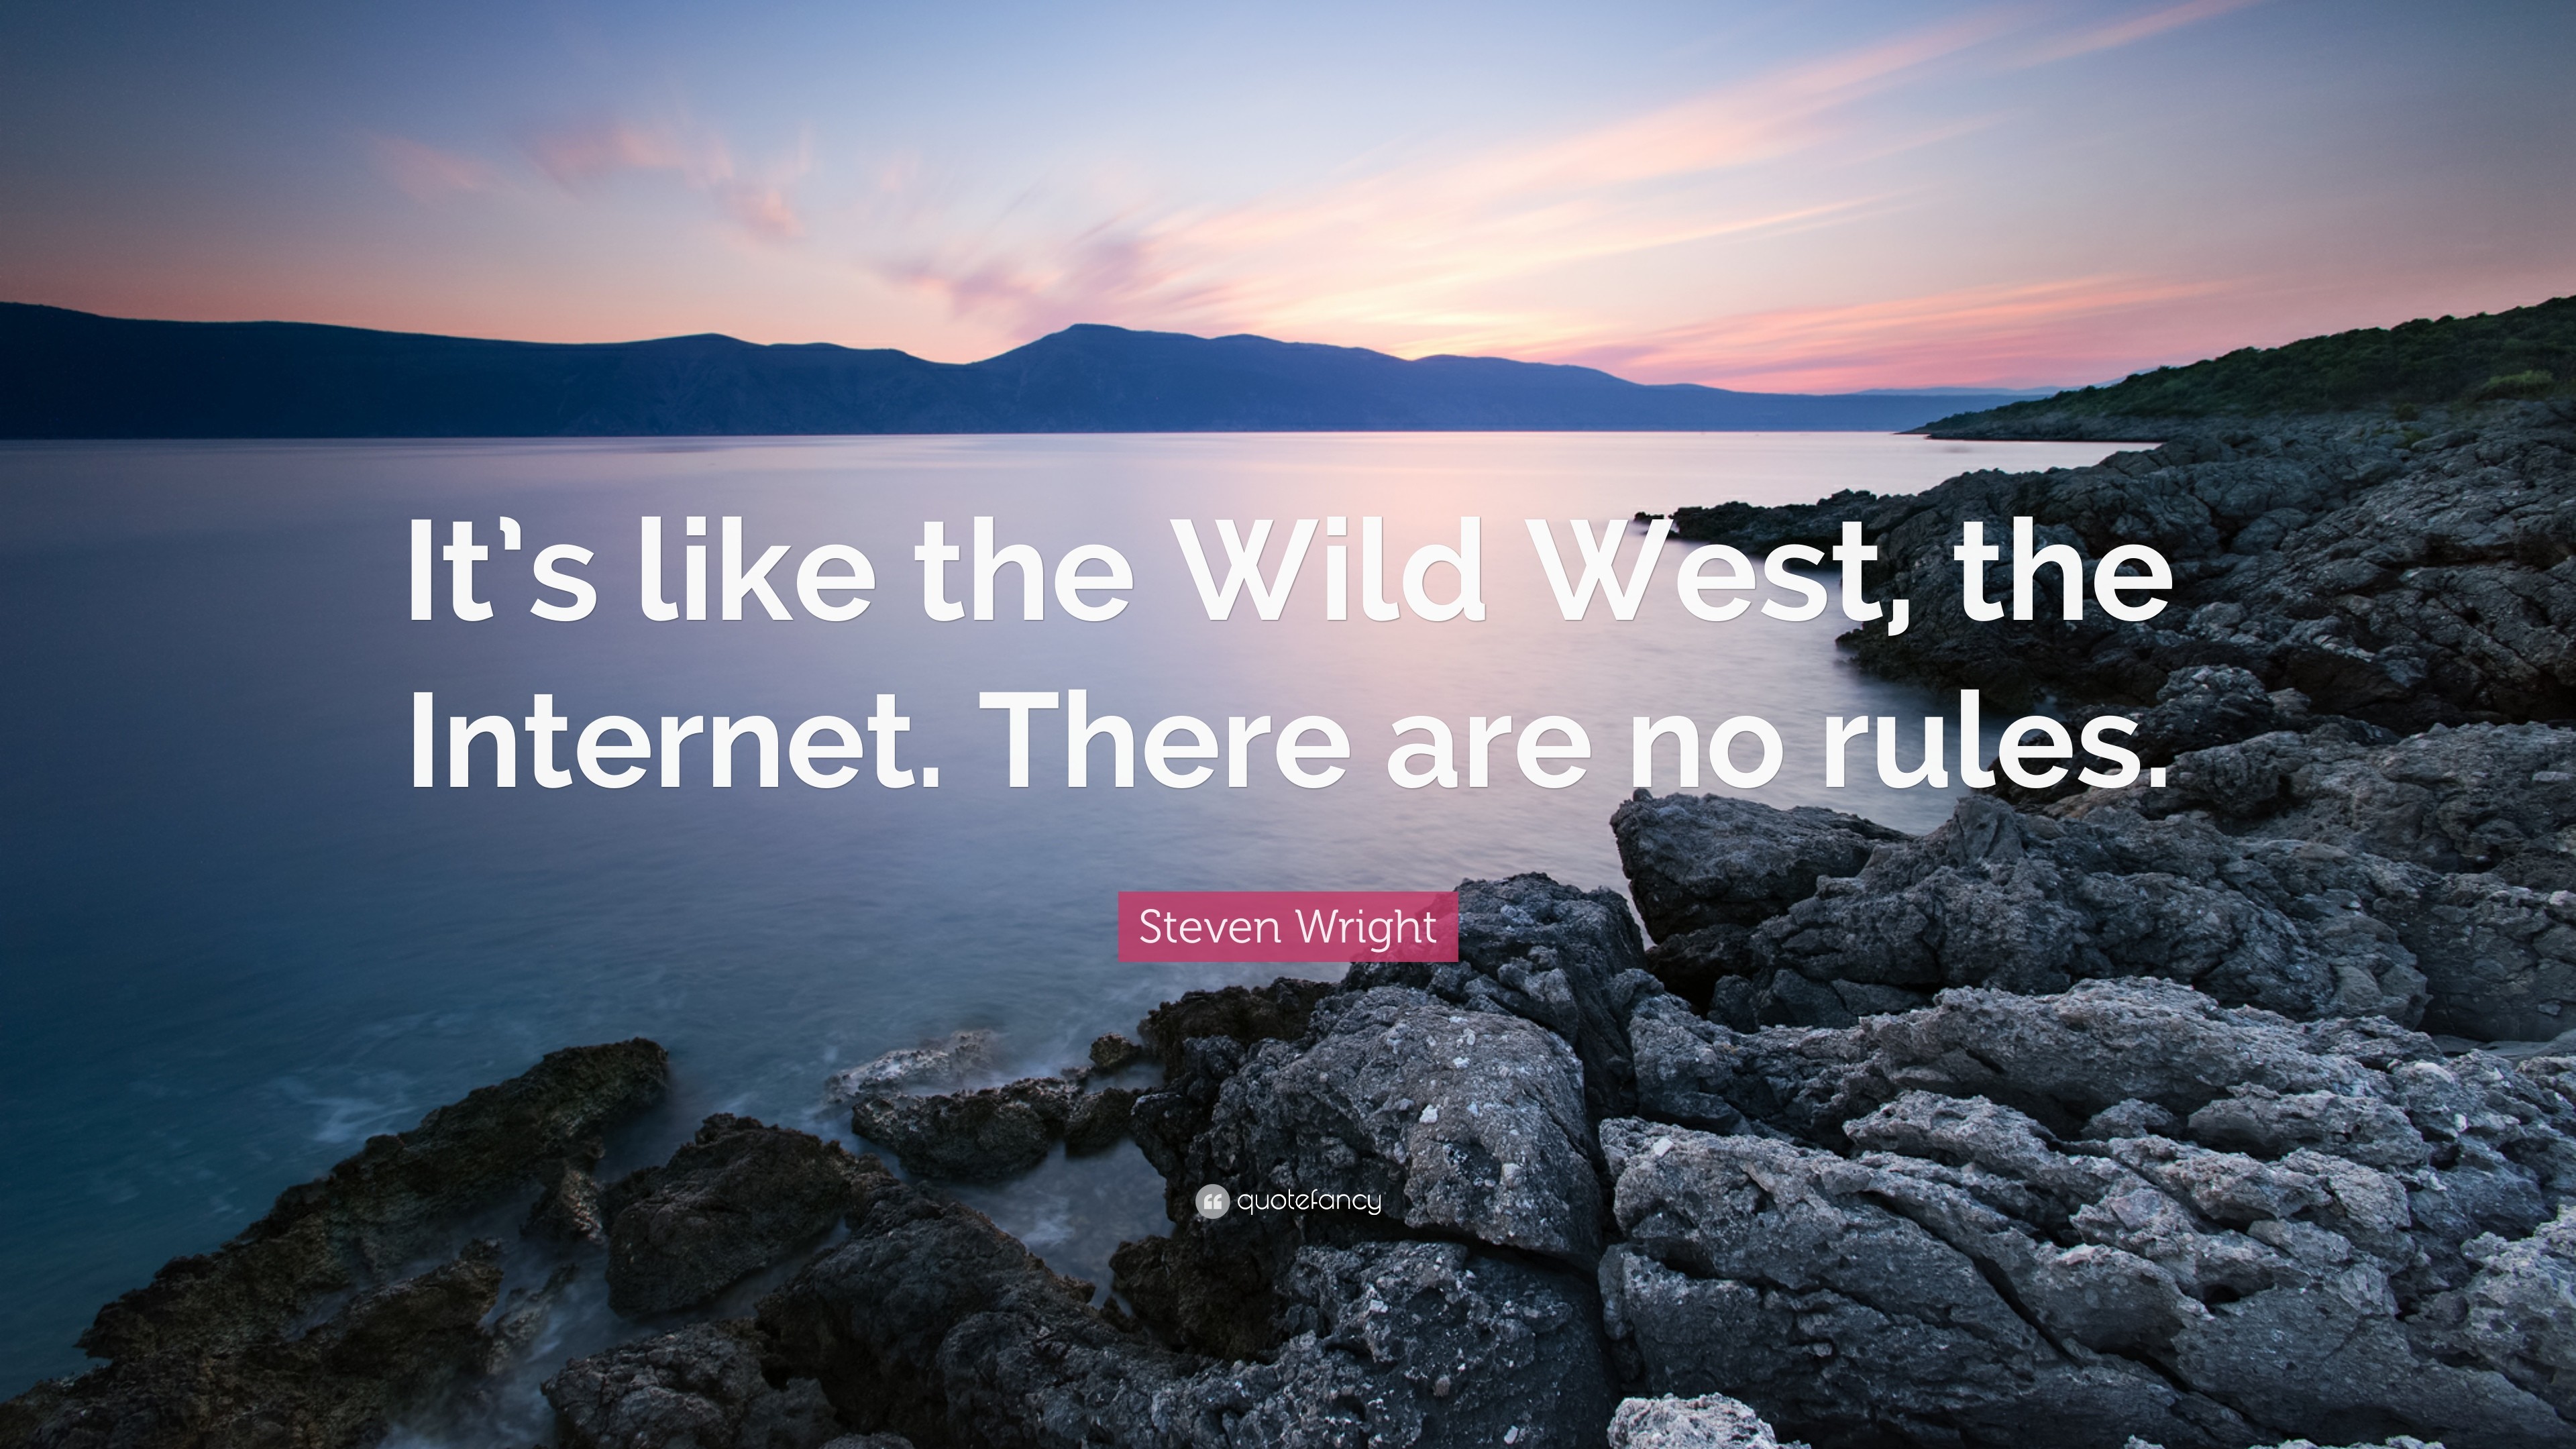 3840x2160 Steven Wright Quote: “It's like the Wild West, the Internet. There are